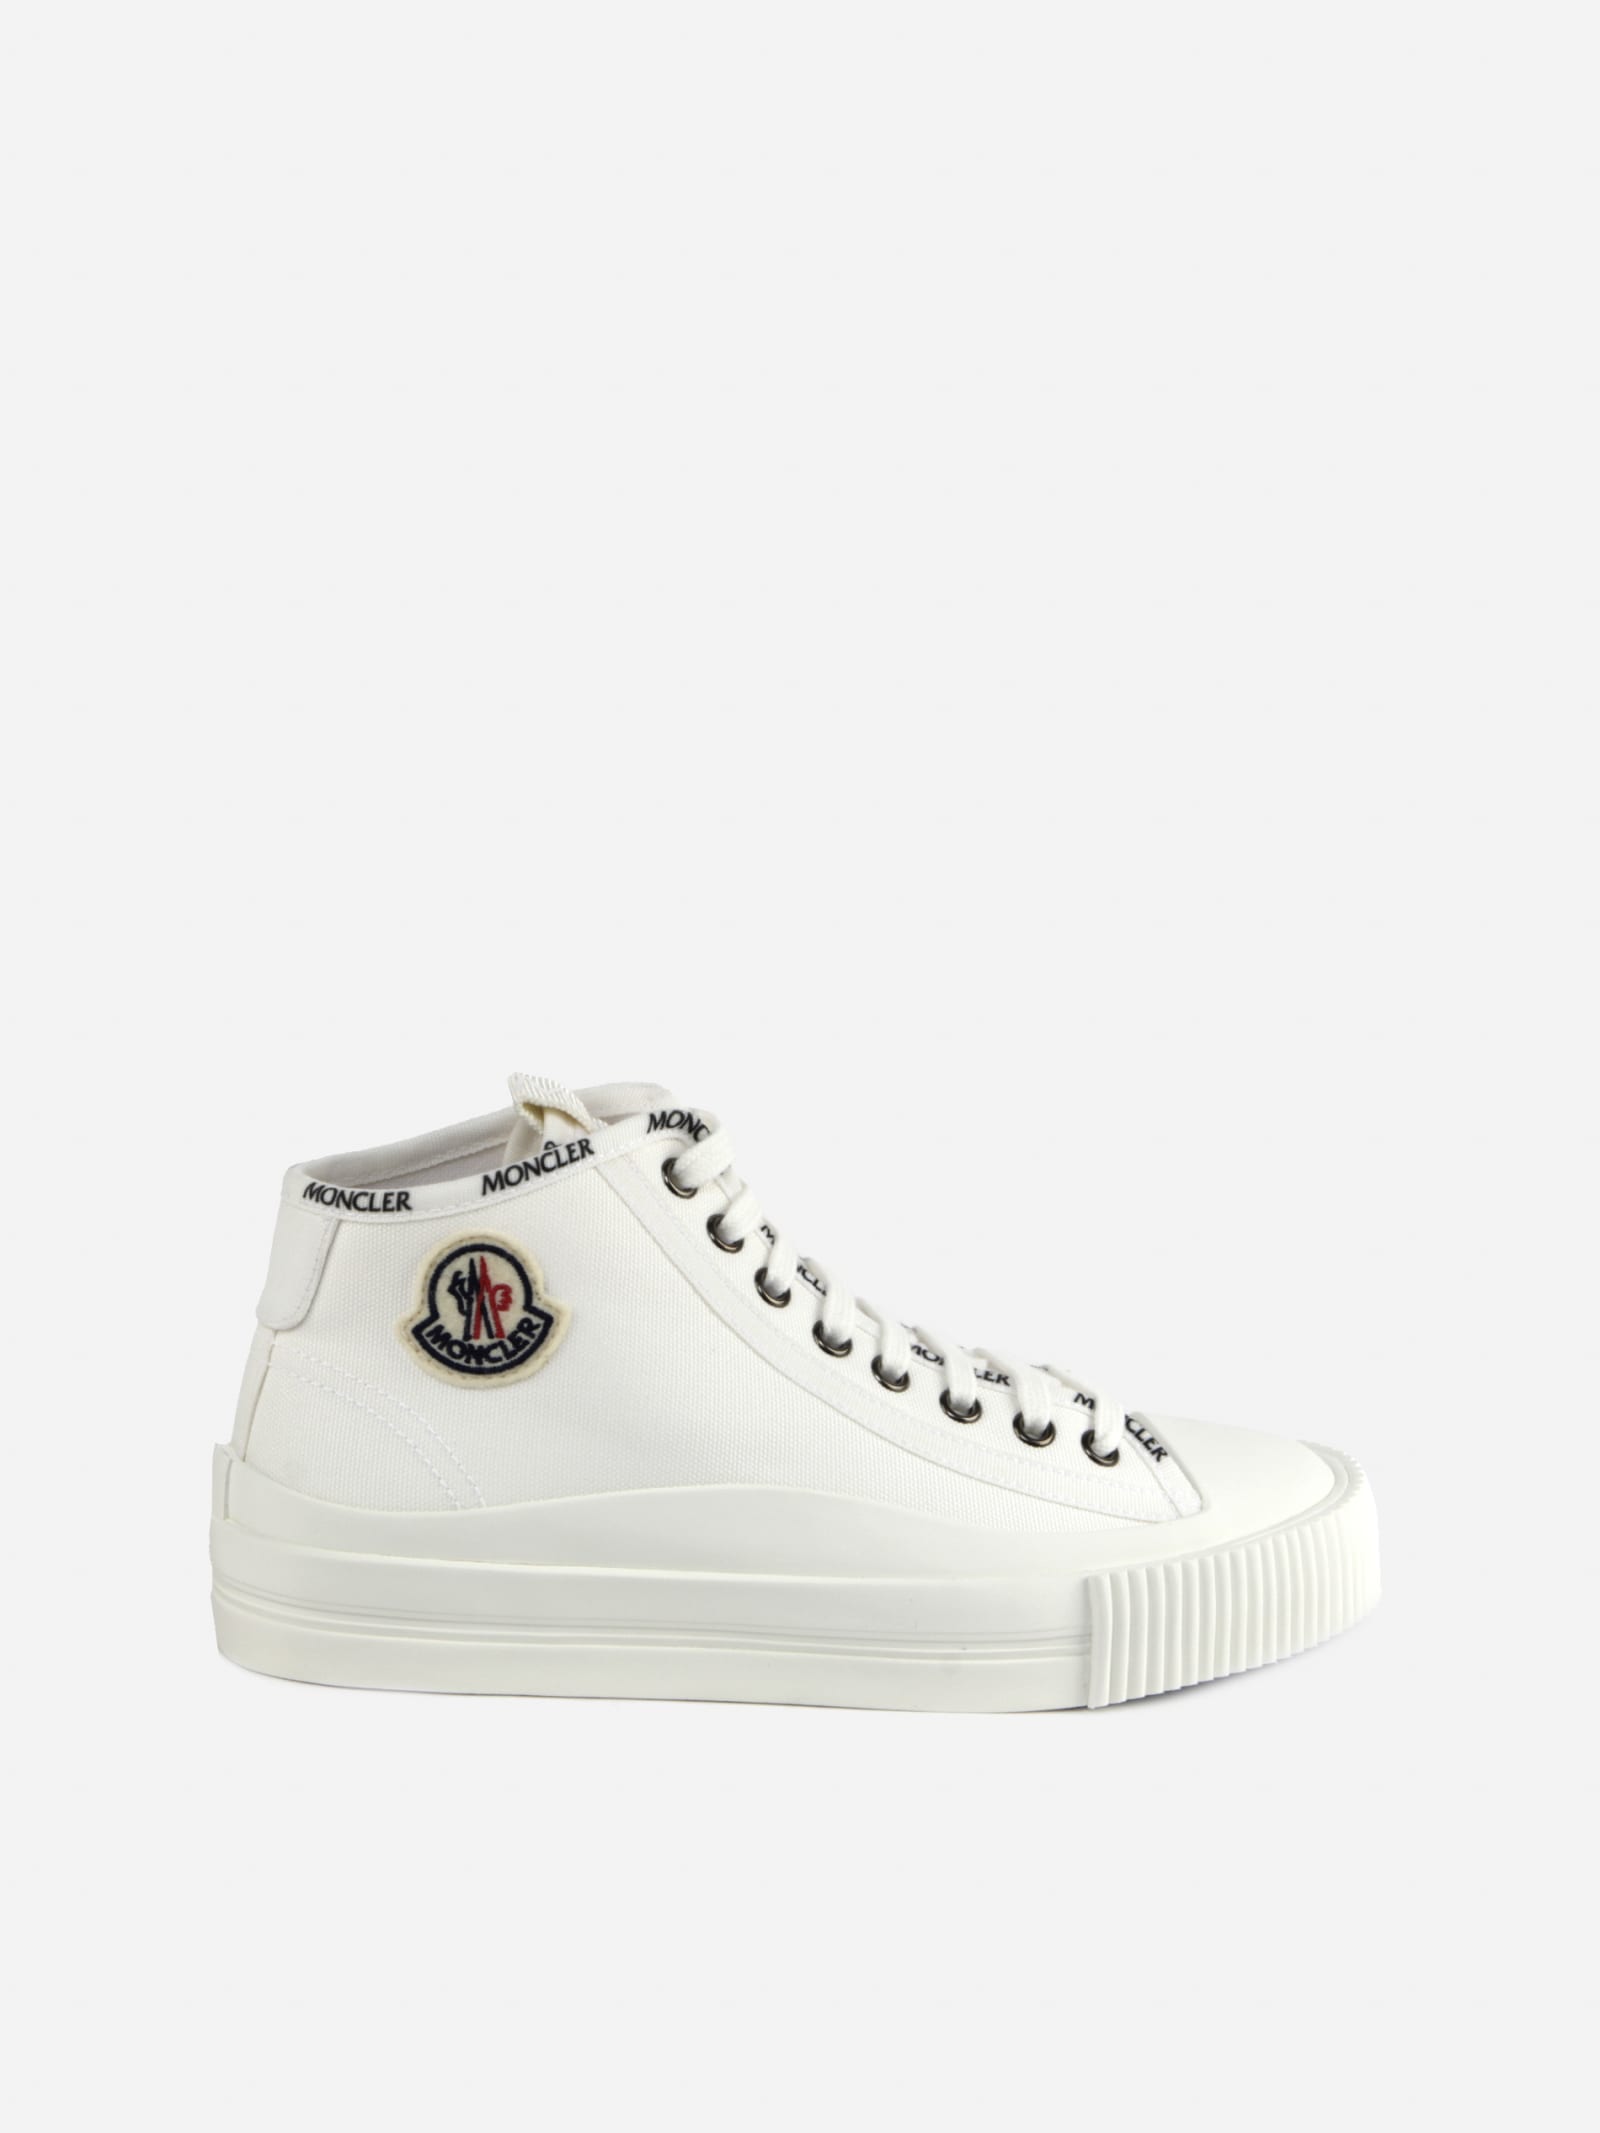 Moncler High Top Sneakers Made Of Cotton In White